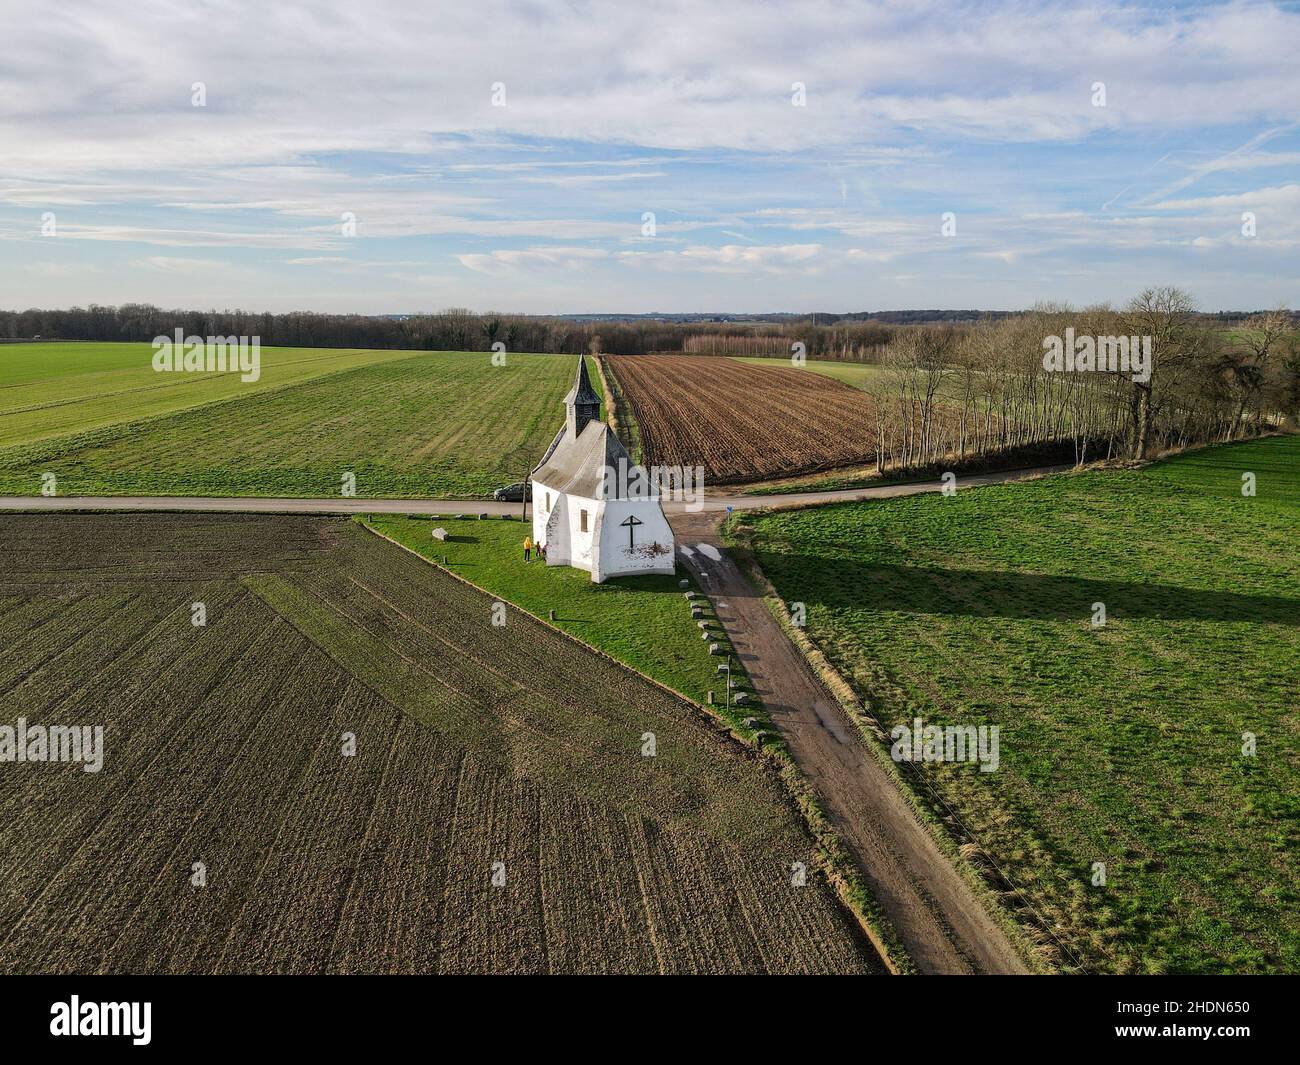 Aerial view of a The chapel of Try au Chene, rural chapel located in Bousval, village on the Belgian town of Genappe. Stock Photo